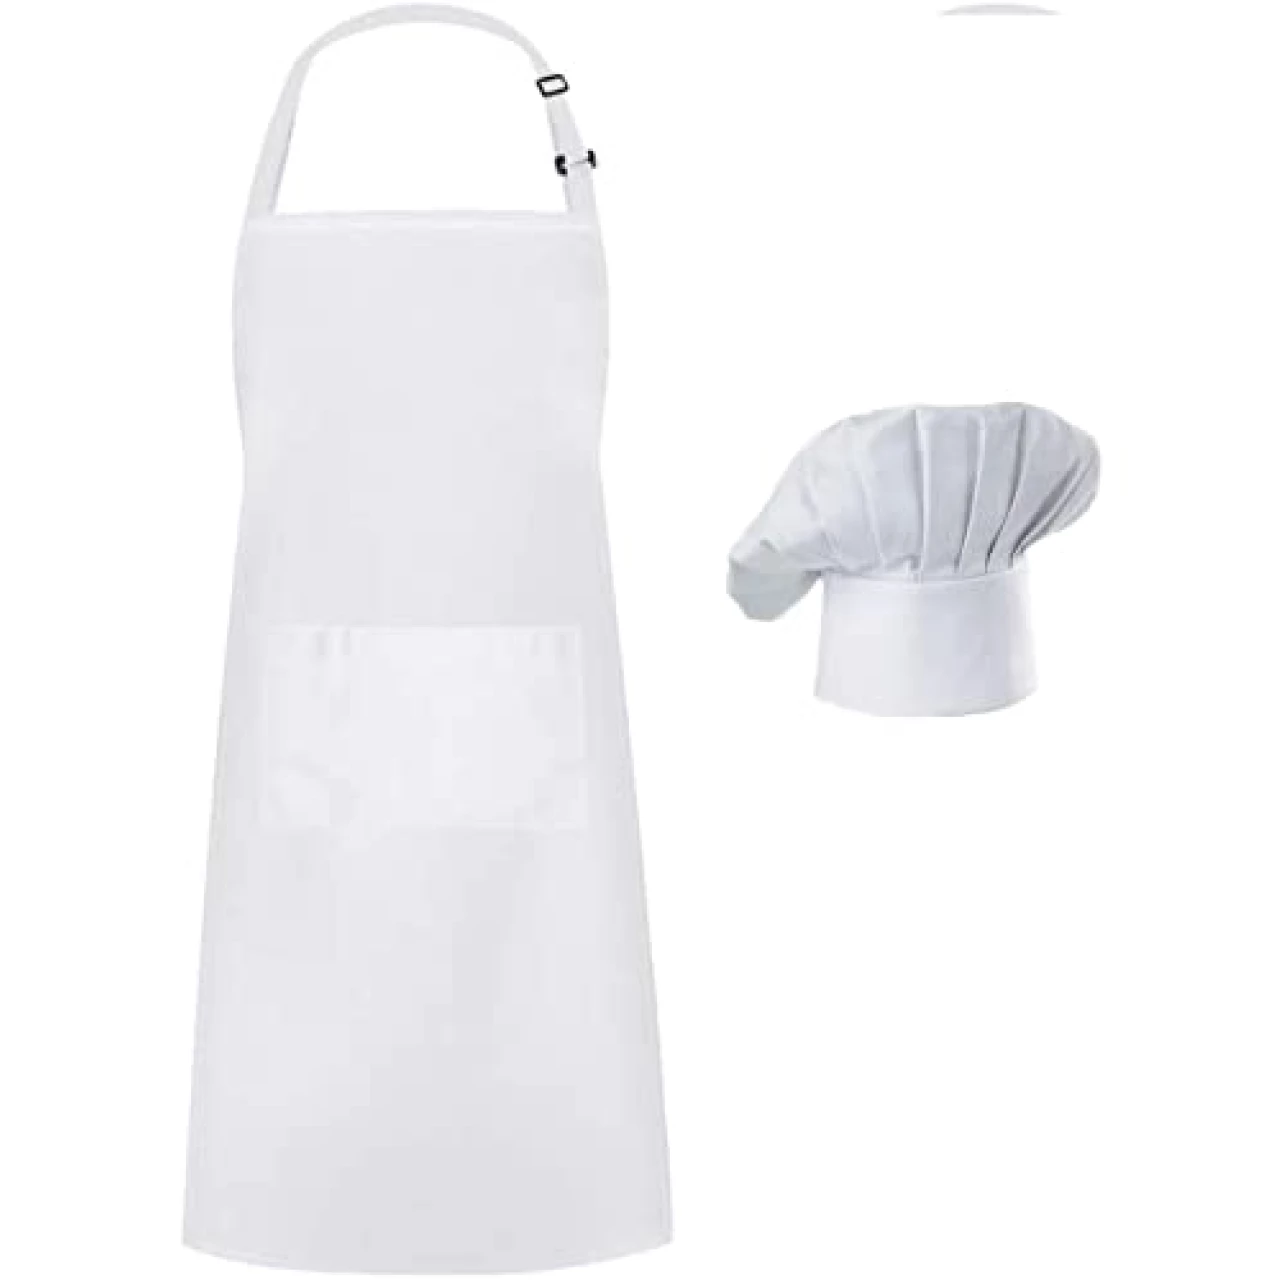 Hyzrz Chef Apron Hat Set, Chef Hat and Kitchen Apron Adult Adjustable Apron with Butcher Hat Baker Costume Kitchen Pocket Apron for Men and Women Father&rsquo;s Gift (White)